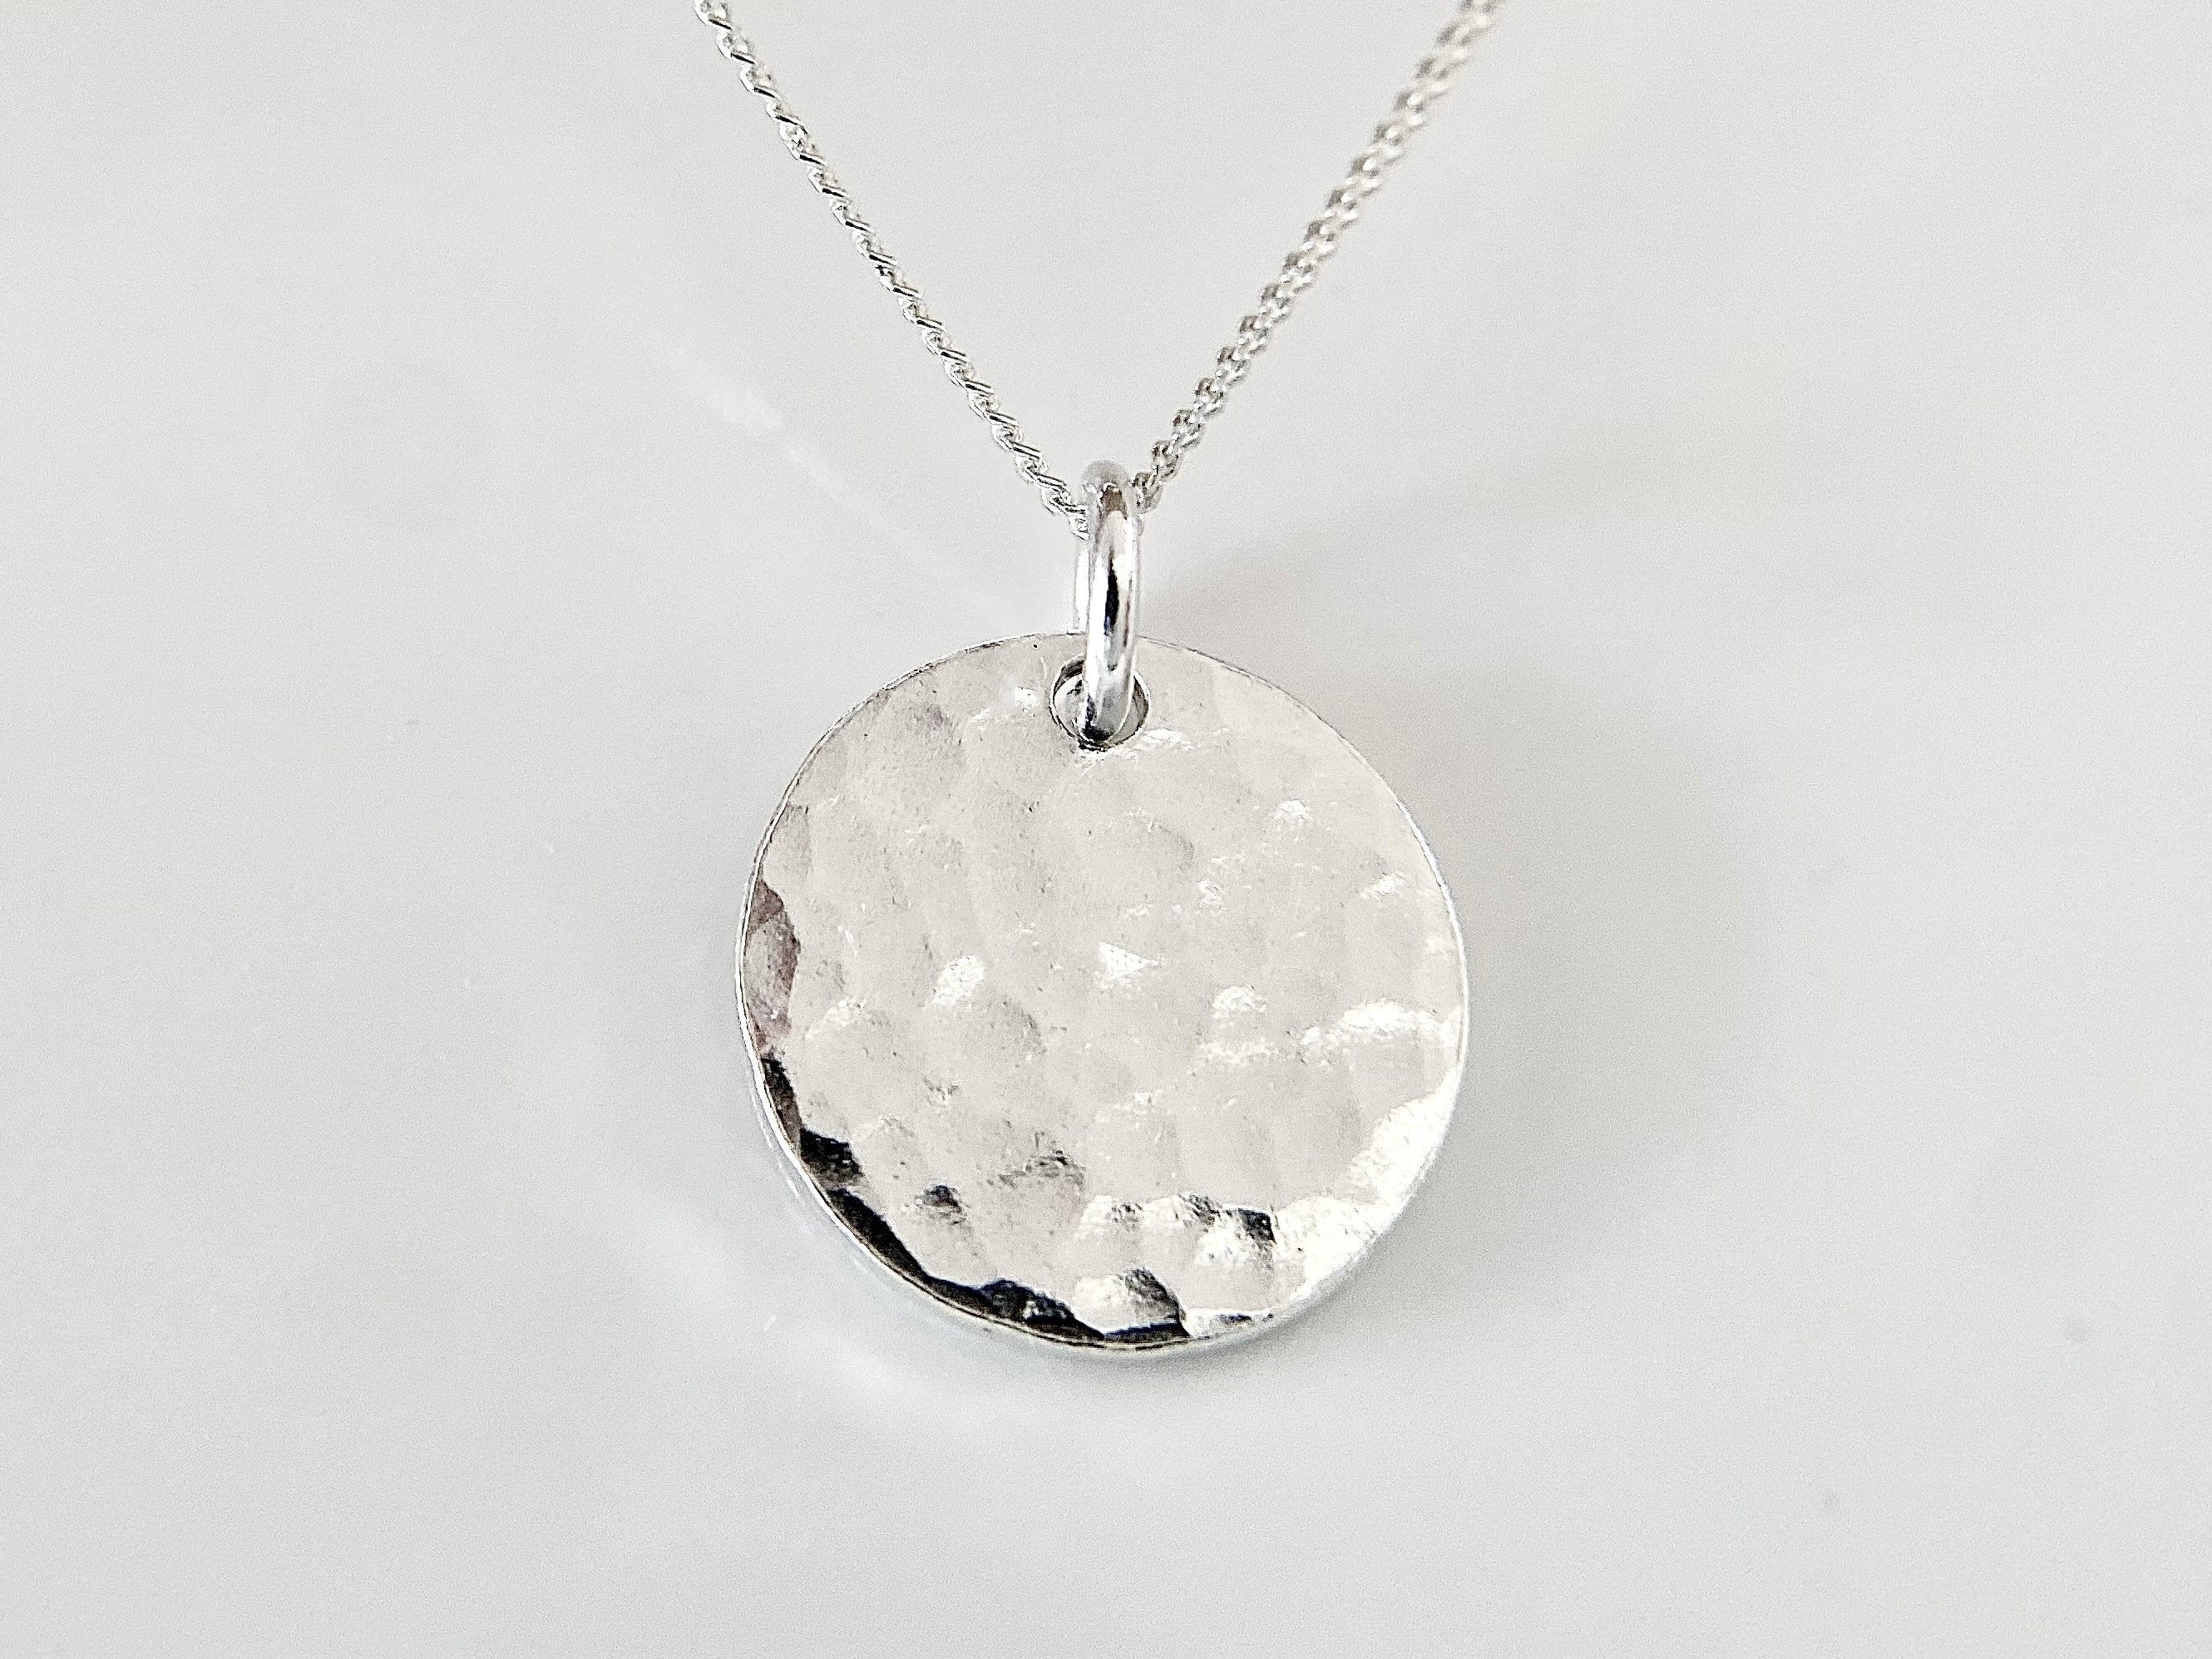 Buy Hammered Gold Disc Necklace, Gold Hammered Necklace, Minimalist Gold  Necklace,sterling Silver, Gold Fill,gift for Her,leilajewelryshop, N256  Online in India - Etsy